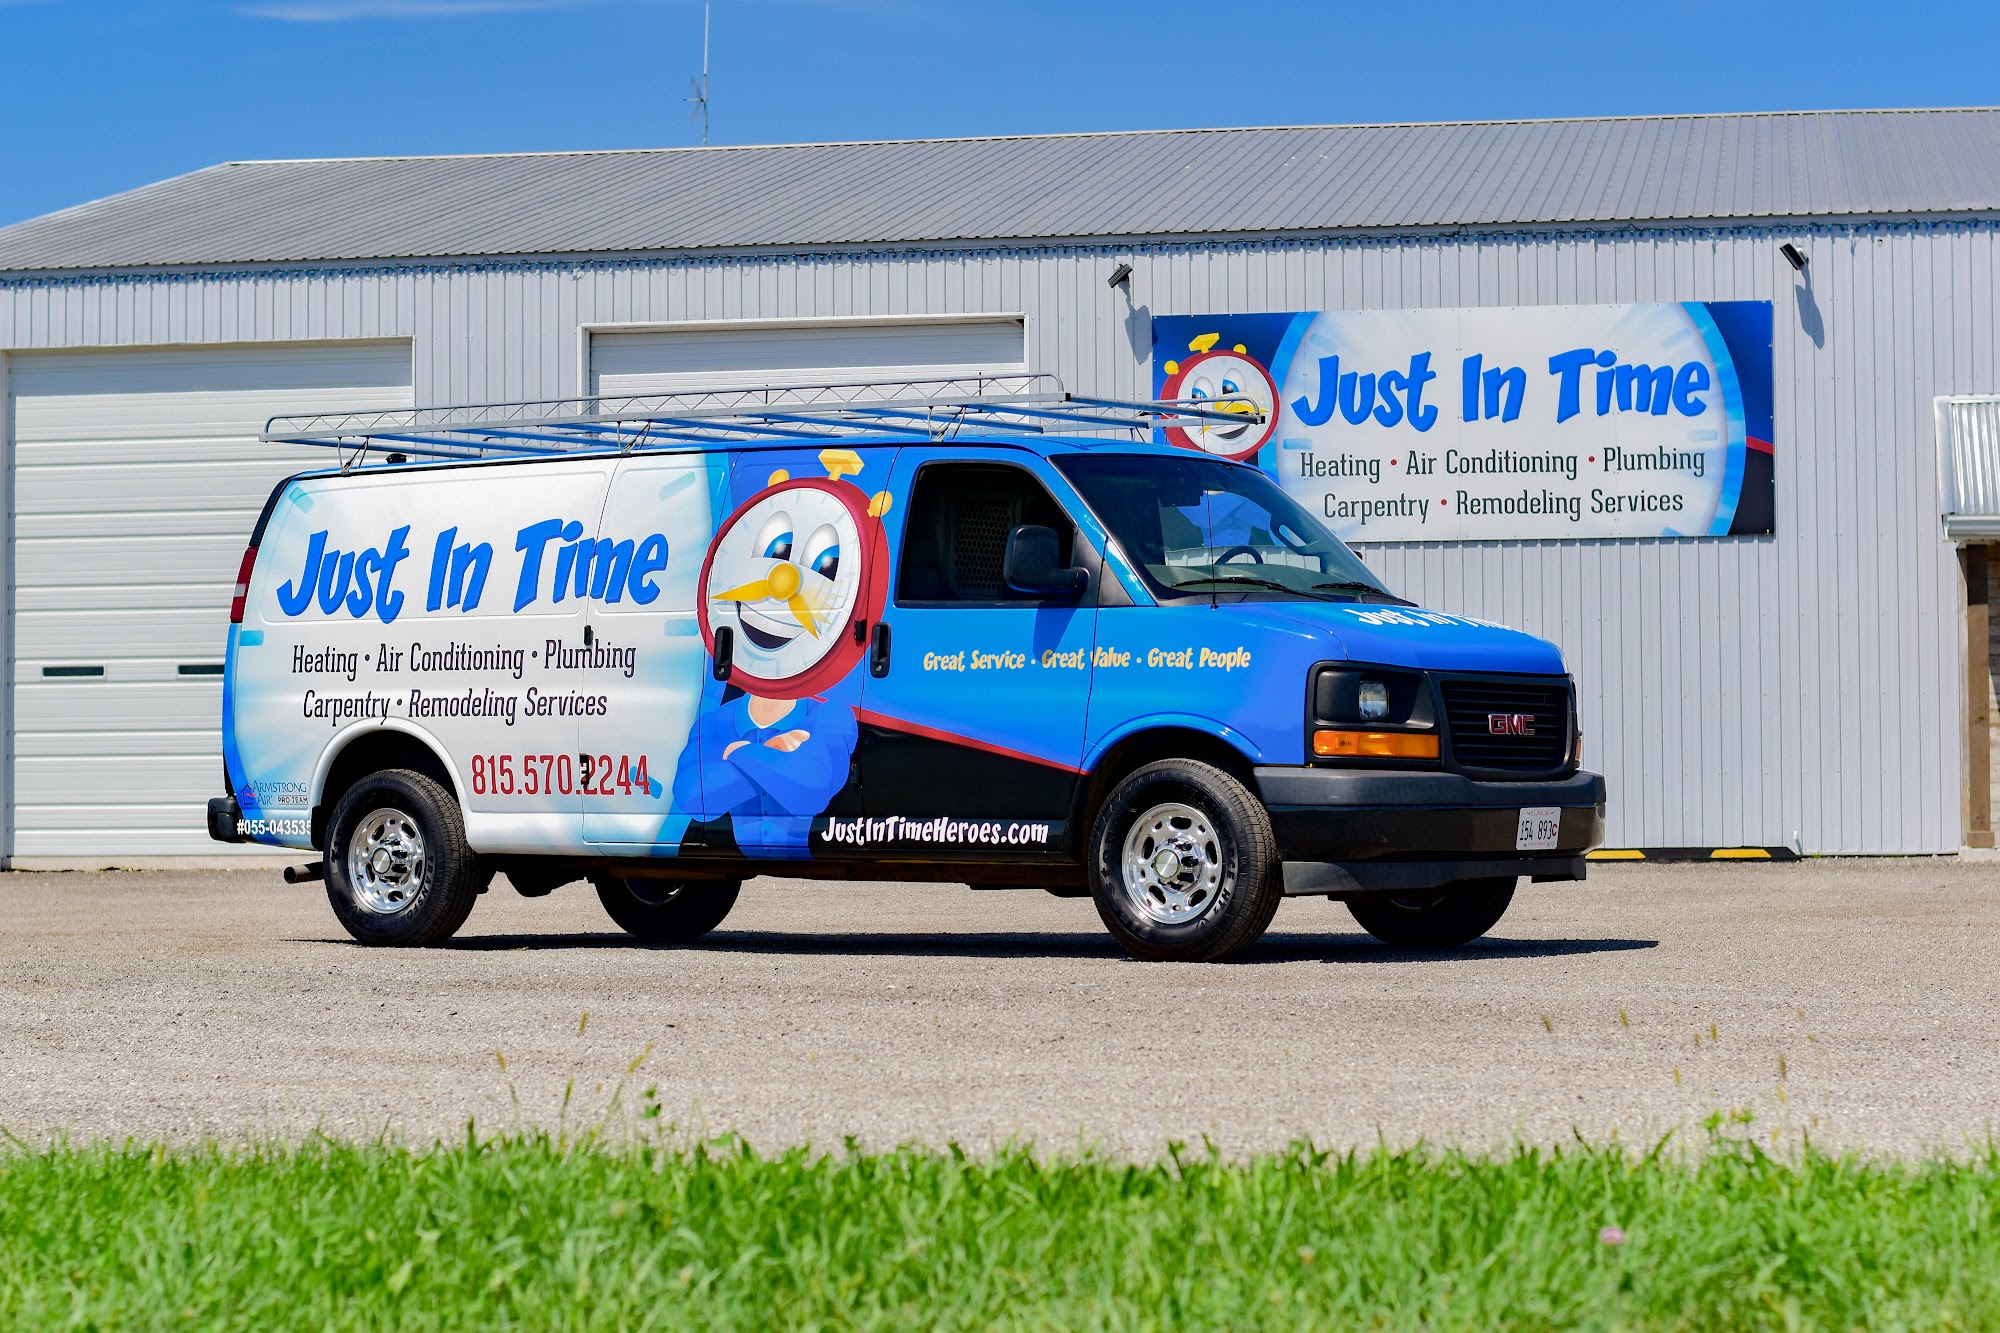 Just In Time Heating, Air Conditioning & Plumbing Services 485 Duvick Ave, Sandwich Illinois 60548